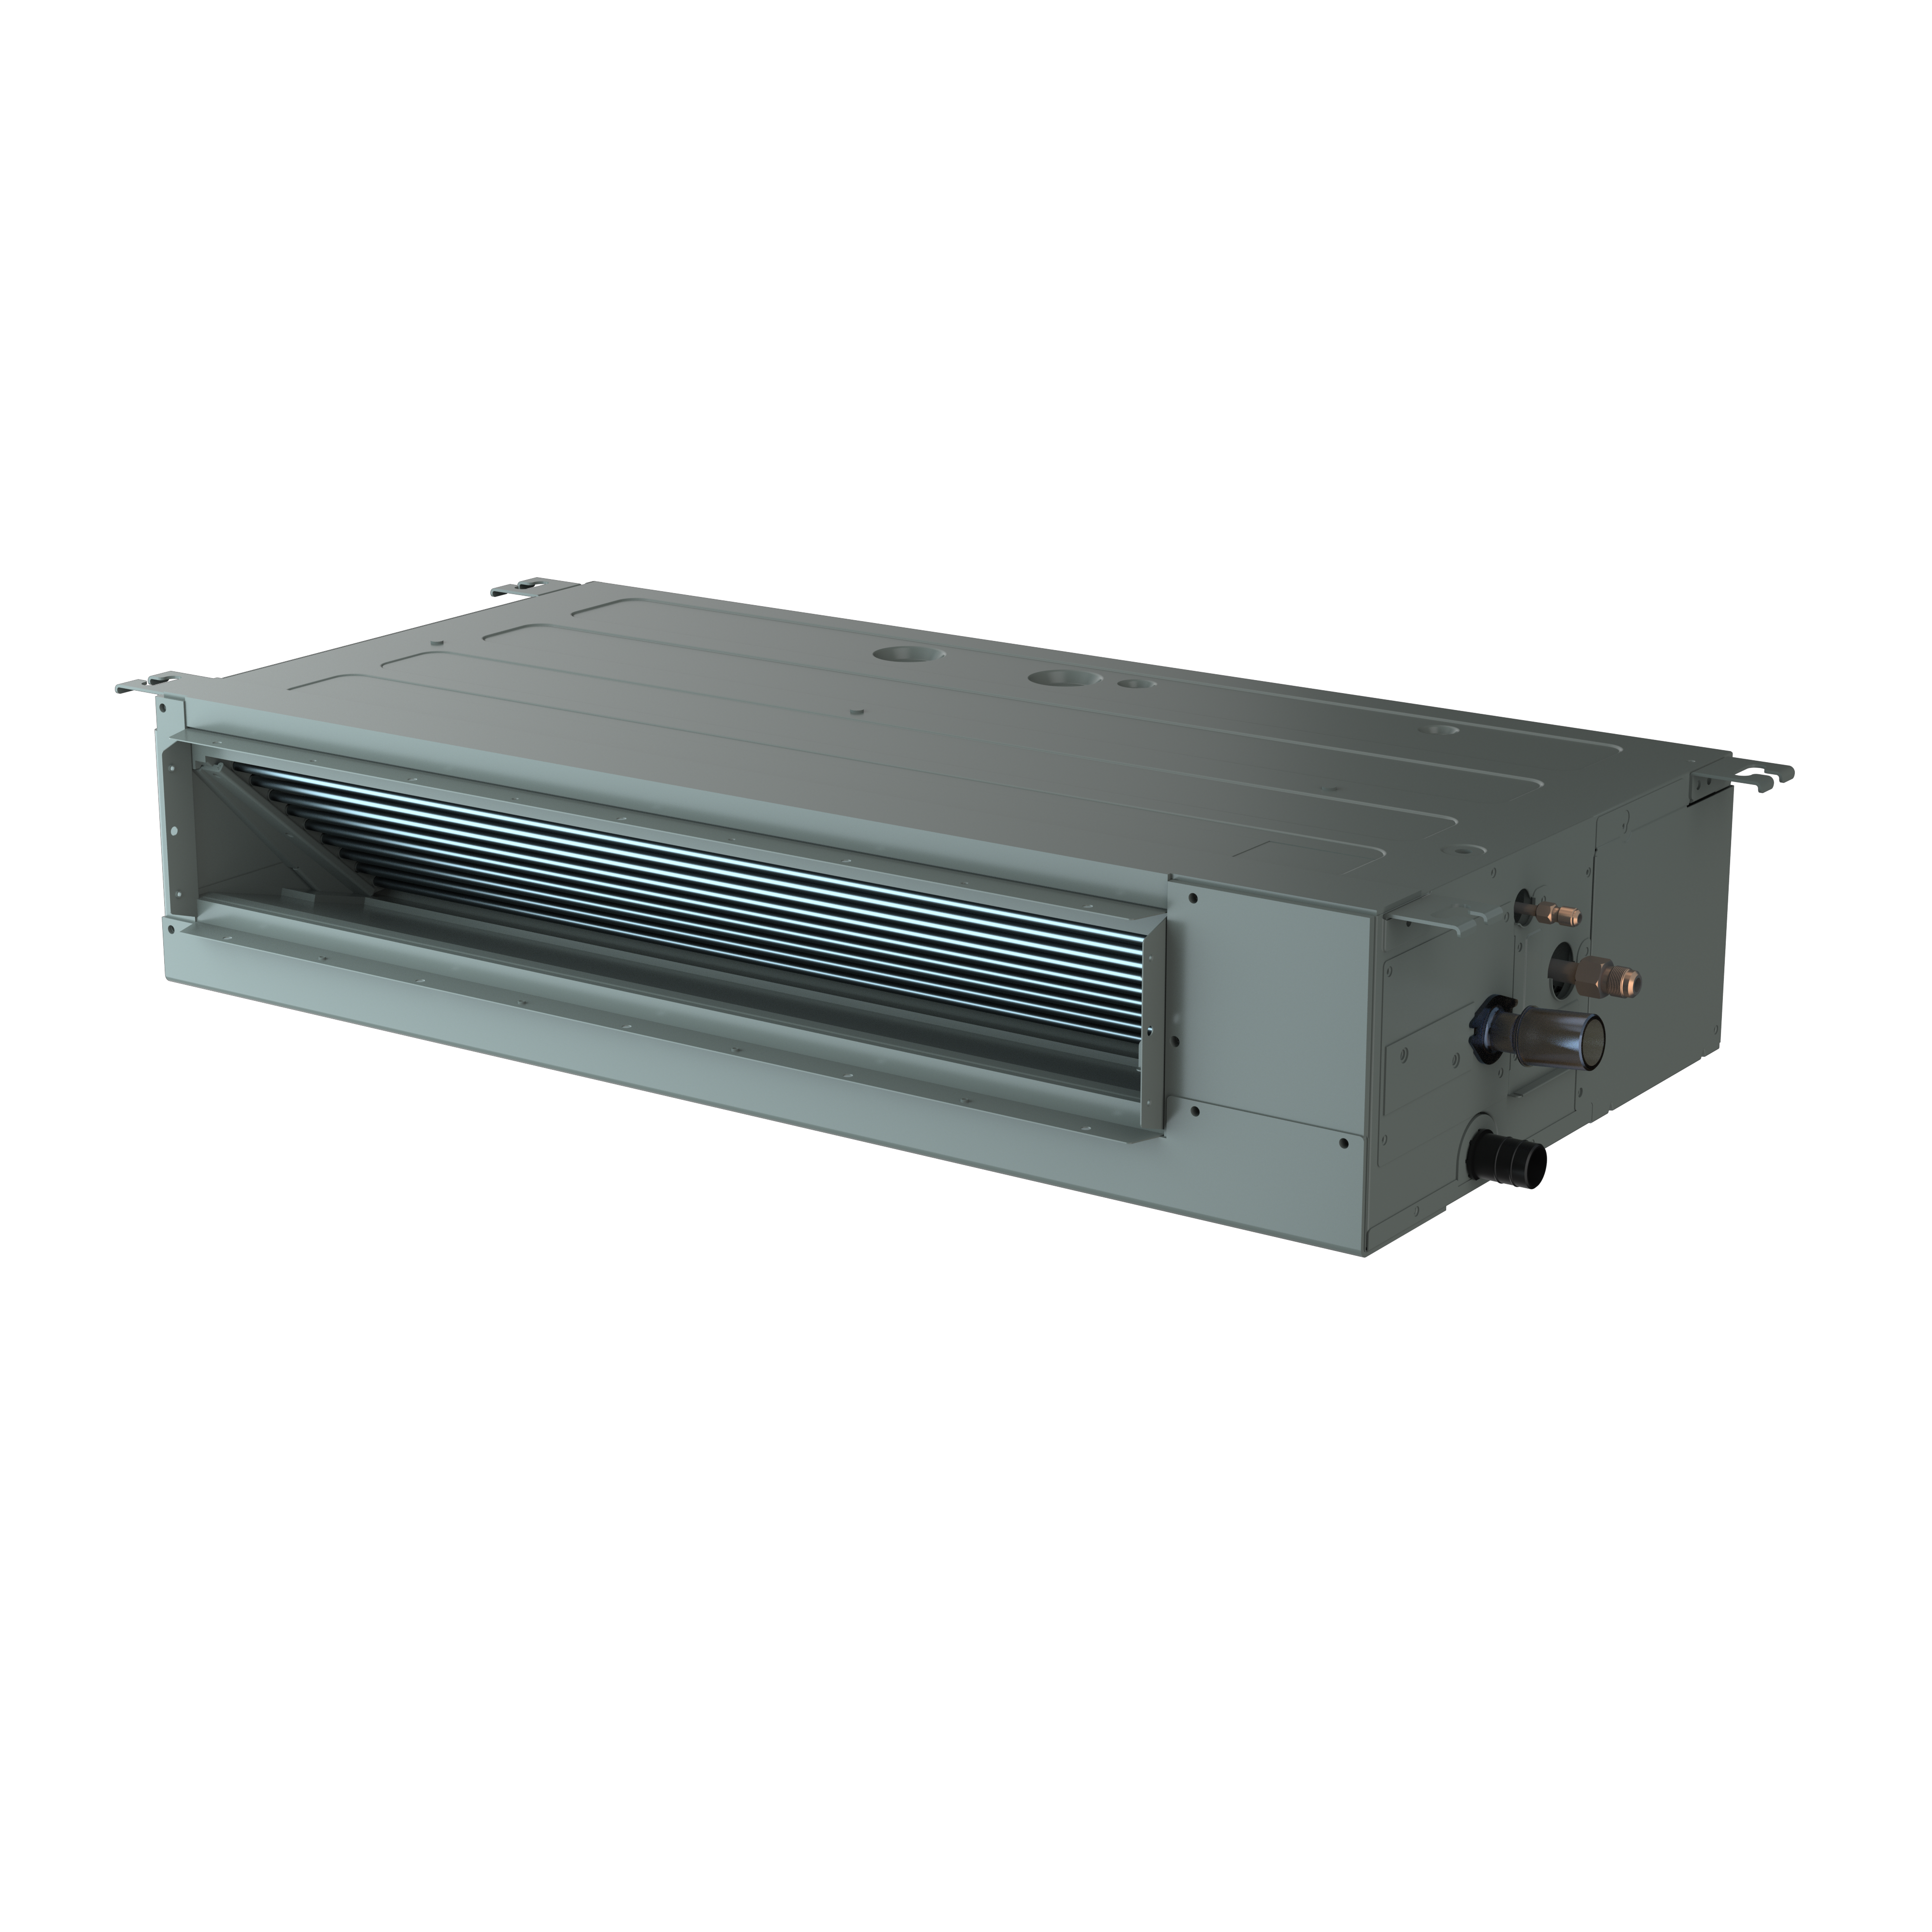 Air-Con 42,000 BTU 20 SEER 3-Zone Concealed Duct 9k+9k+24k Mini Split Air Conditioner and Heater System